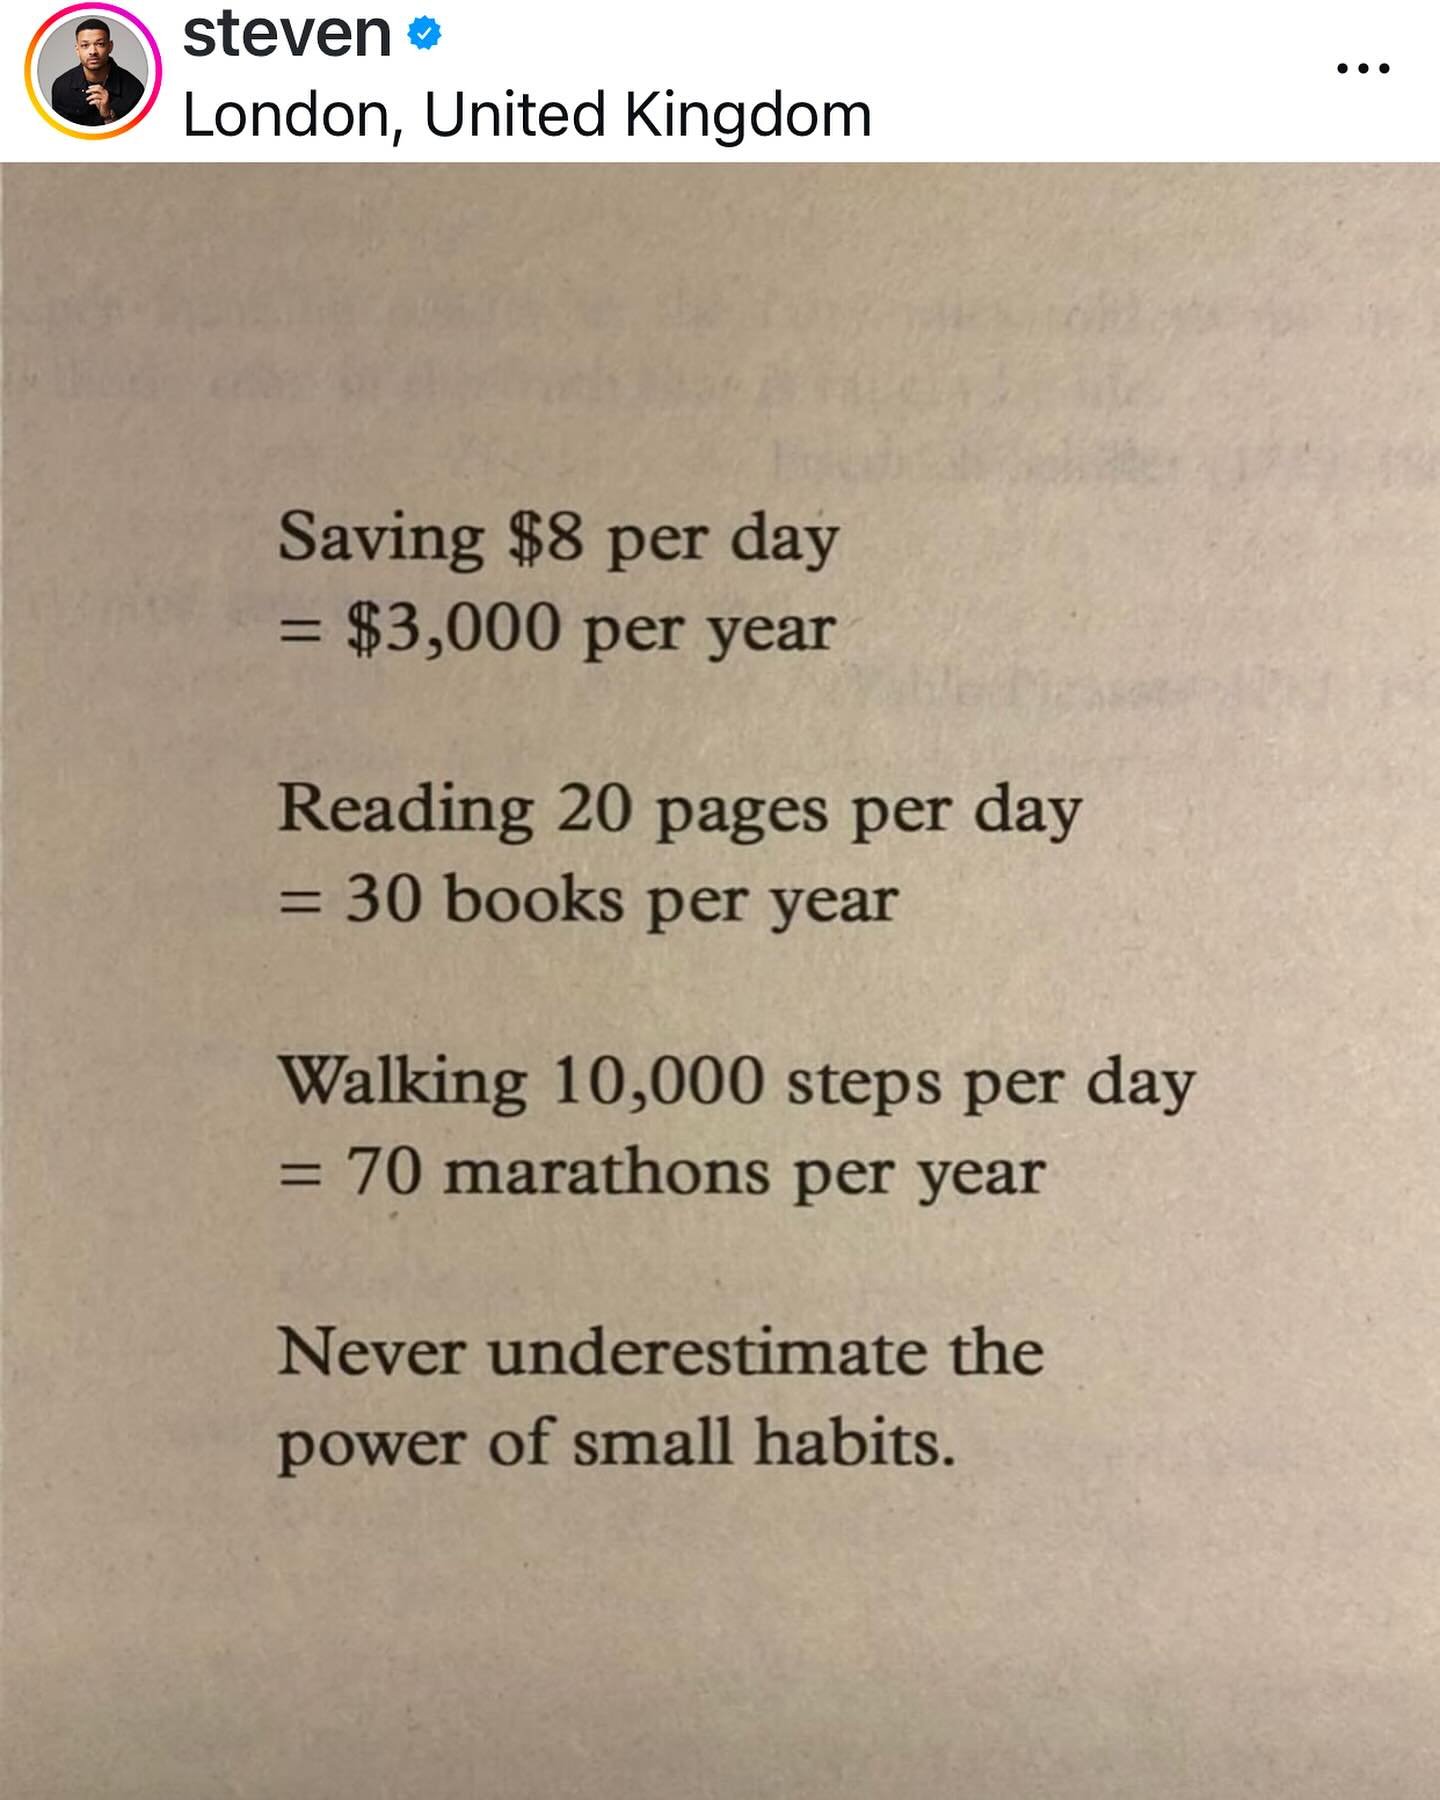 Well when you put it this way&hellip;
Apparently I&rsquo;m a legit marathoner!

Thank you @steven for making the point that small things become big things. Life is about those habits we build with each action, reaction, and interaction.
We choose.